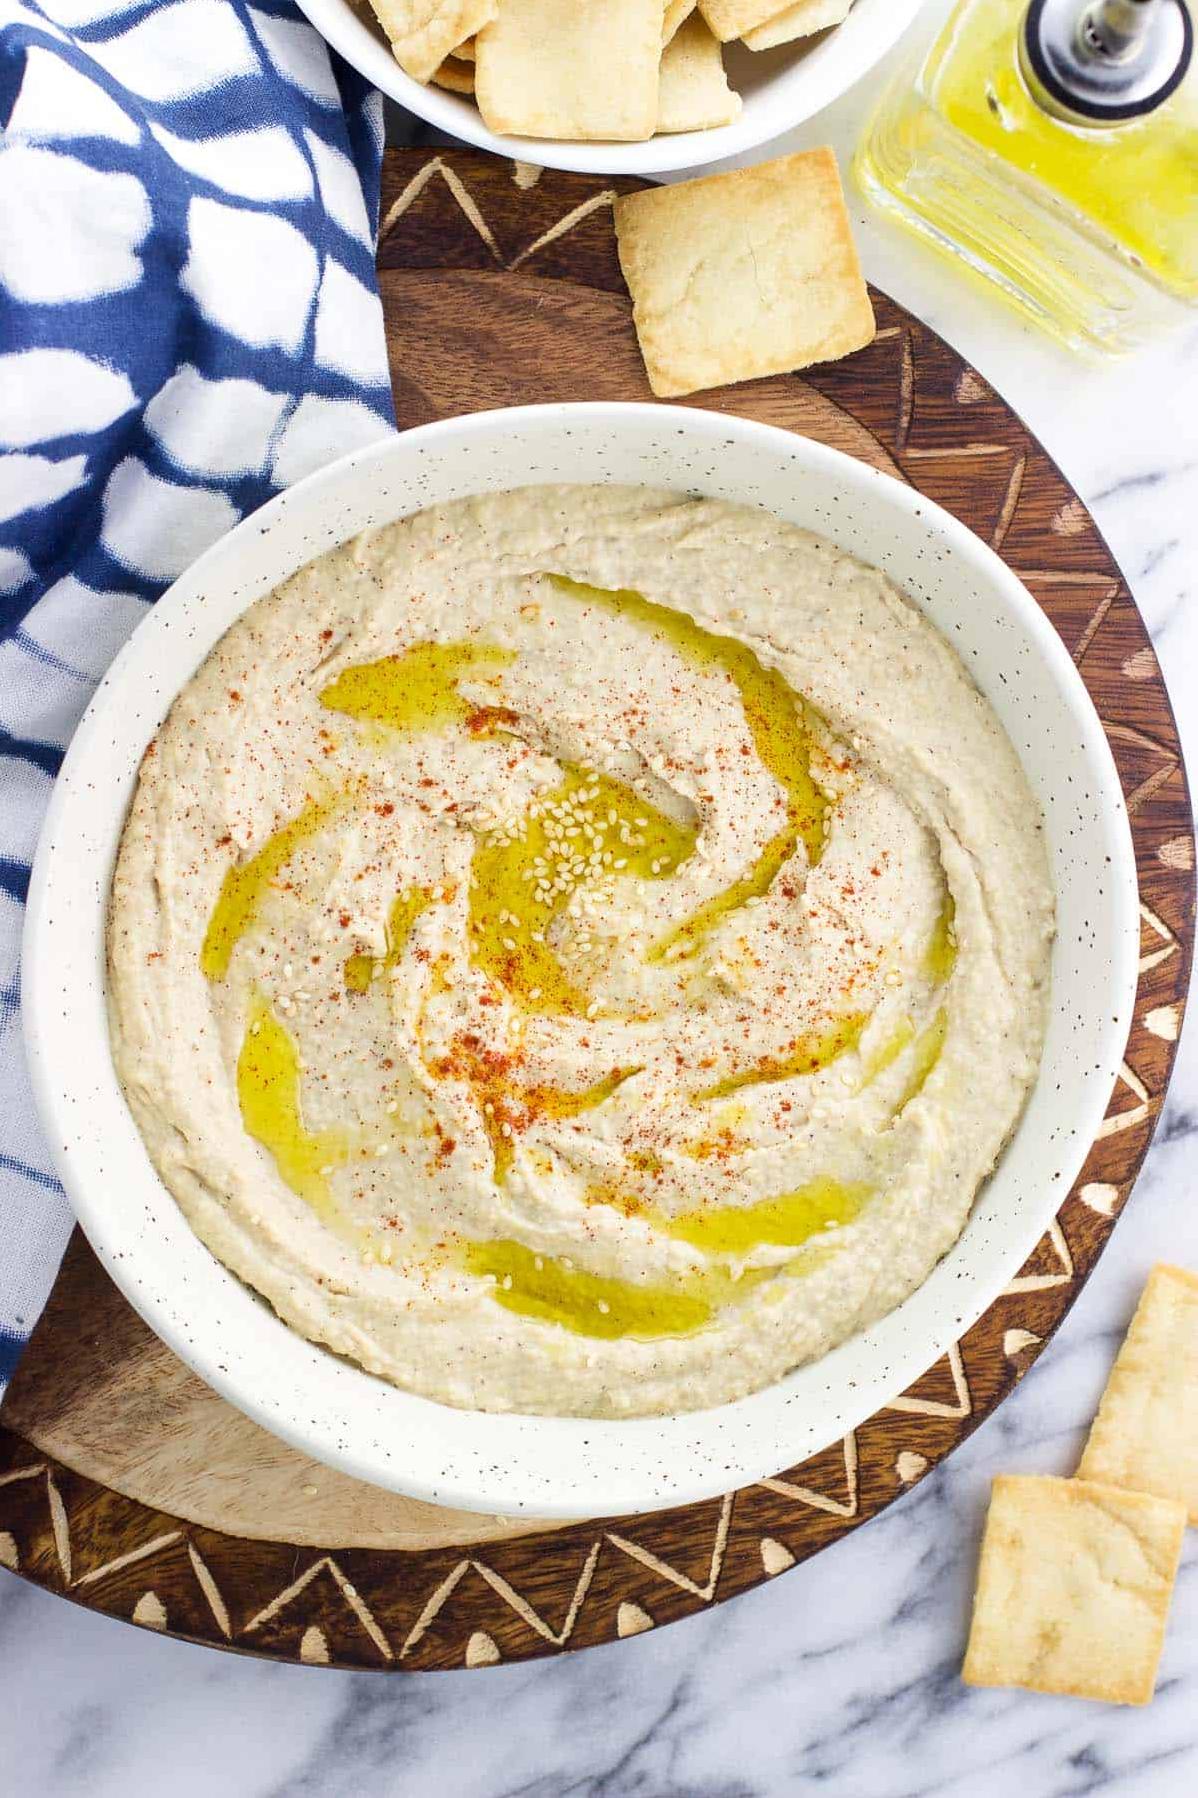  This colorful hummus is a feast for the eyes and the taste buds.